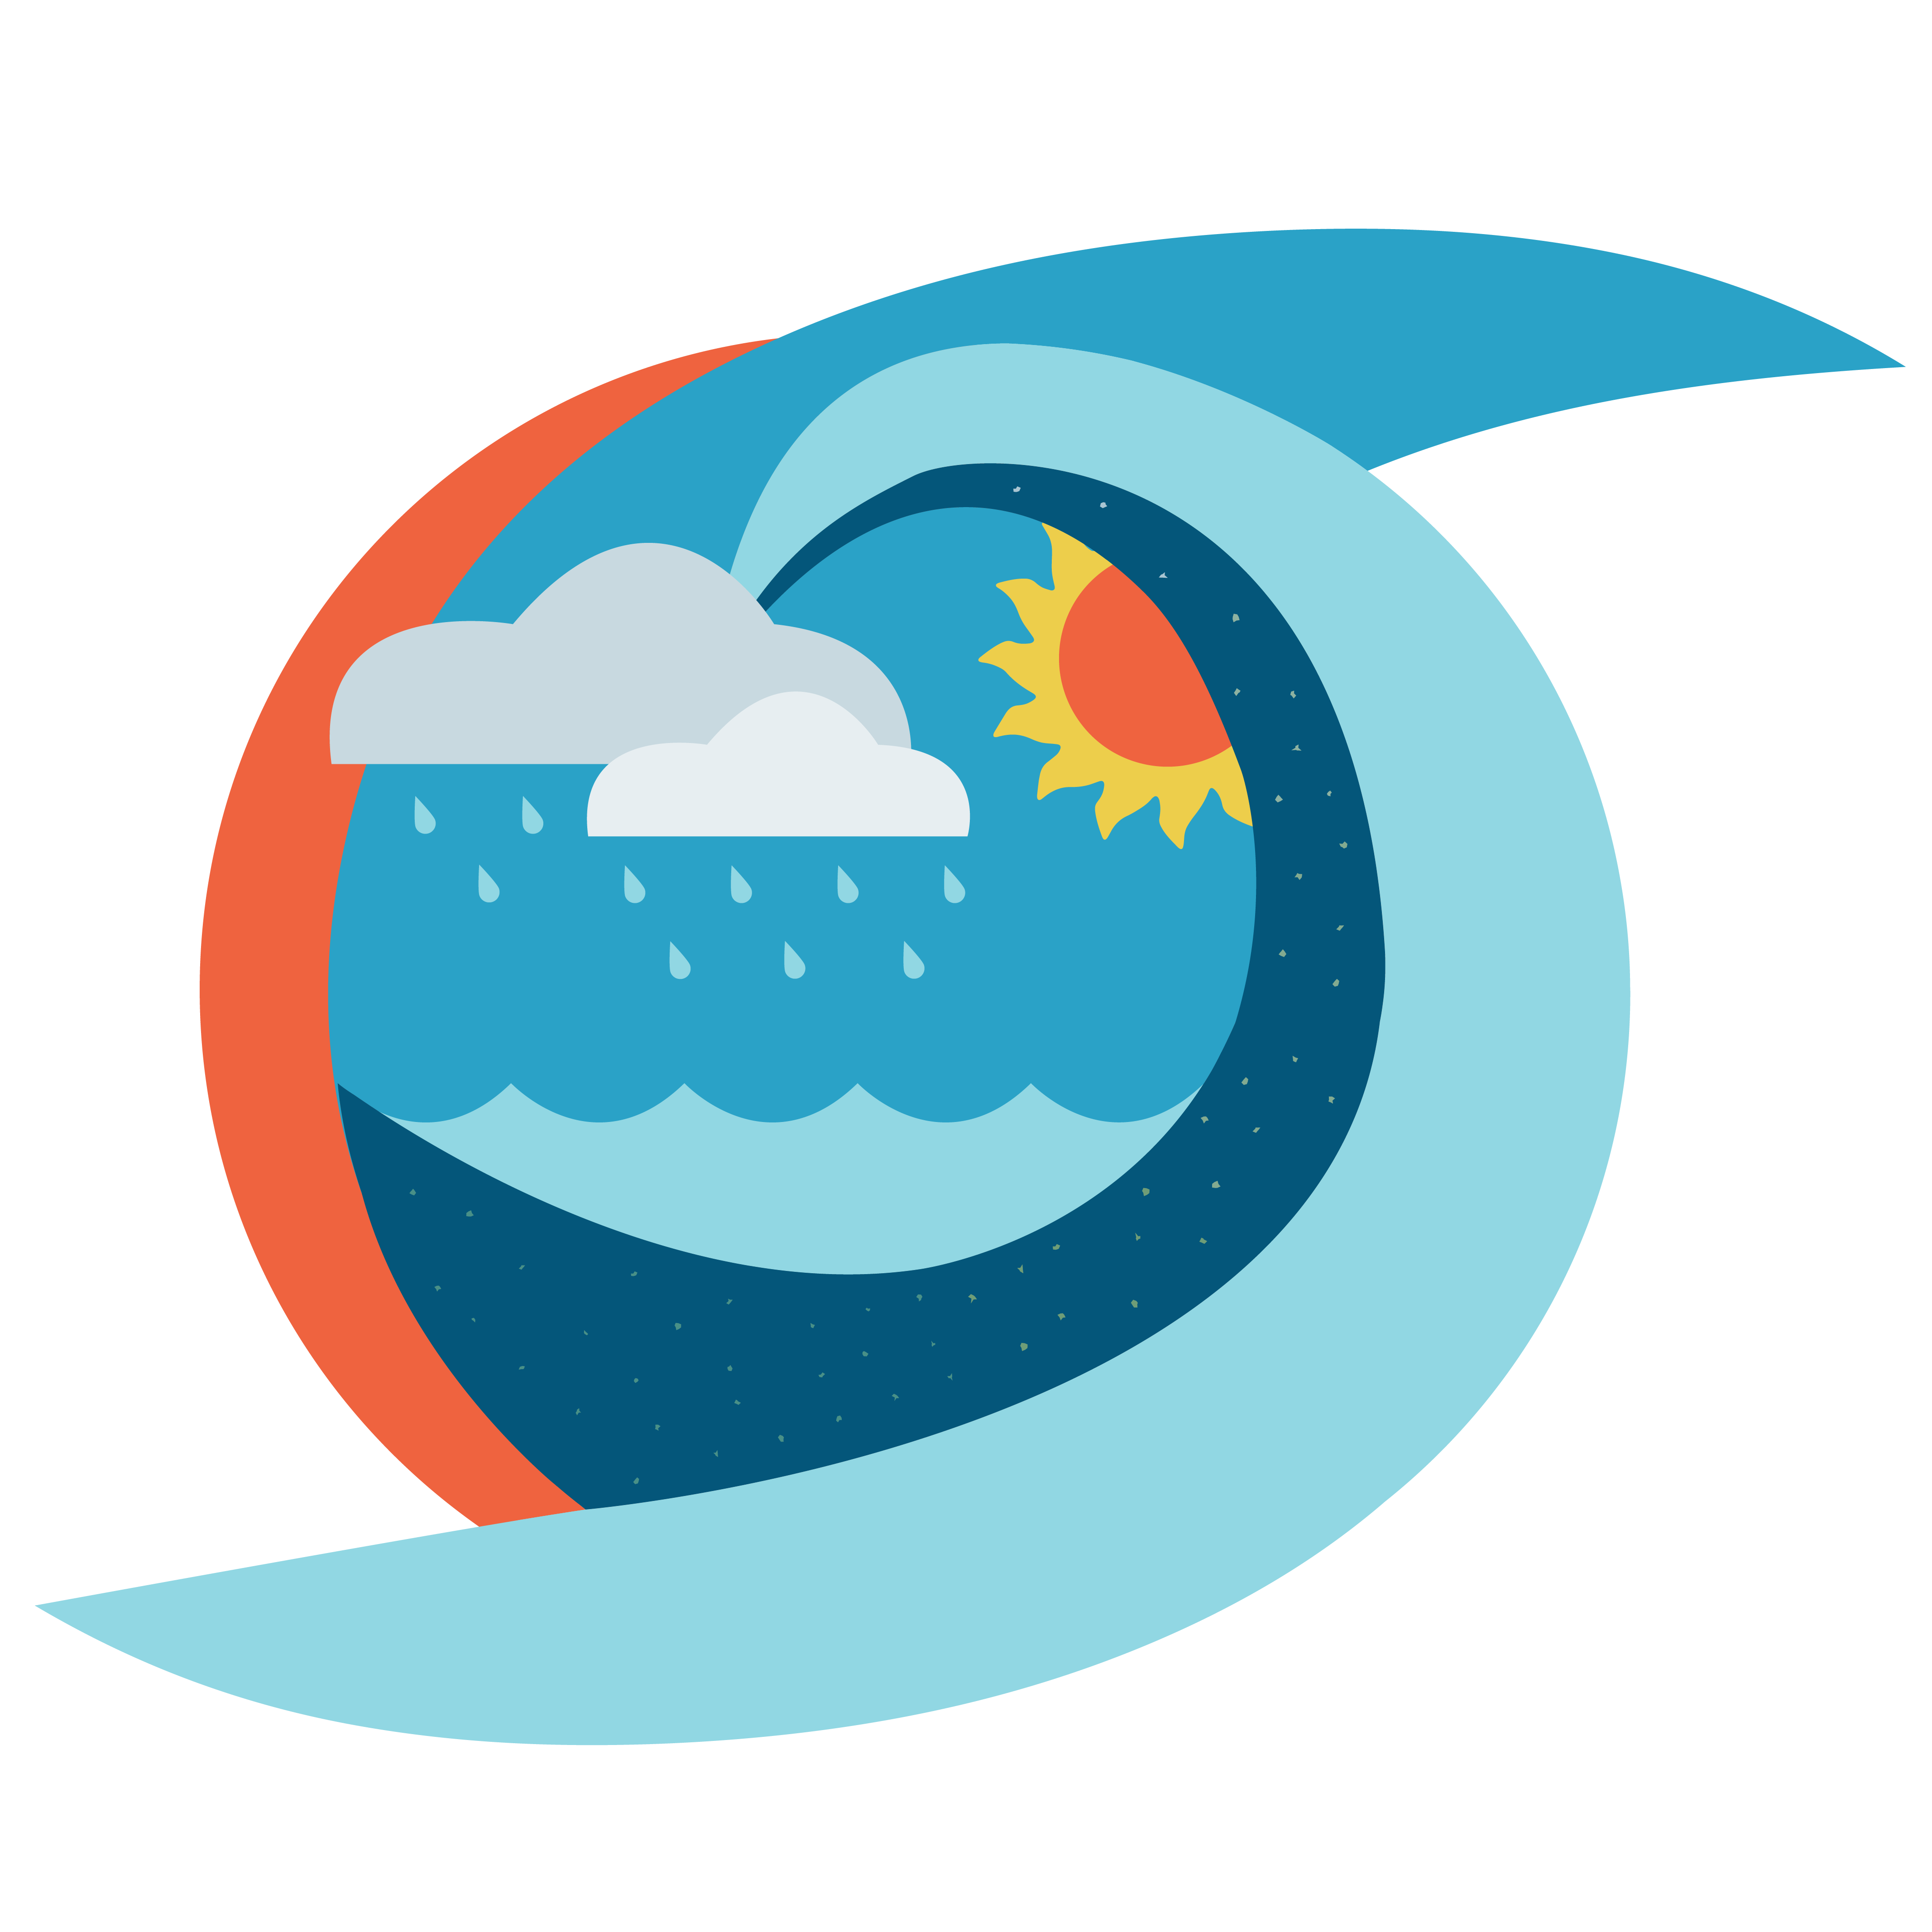  A graphic of the ocean, sun, sky, and rain clouds connected into a hurricane-like symbol. Specs in the water indicate other molecules, like carbon.